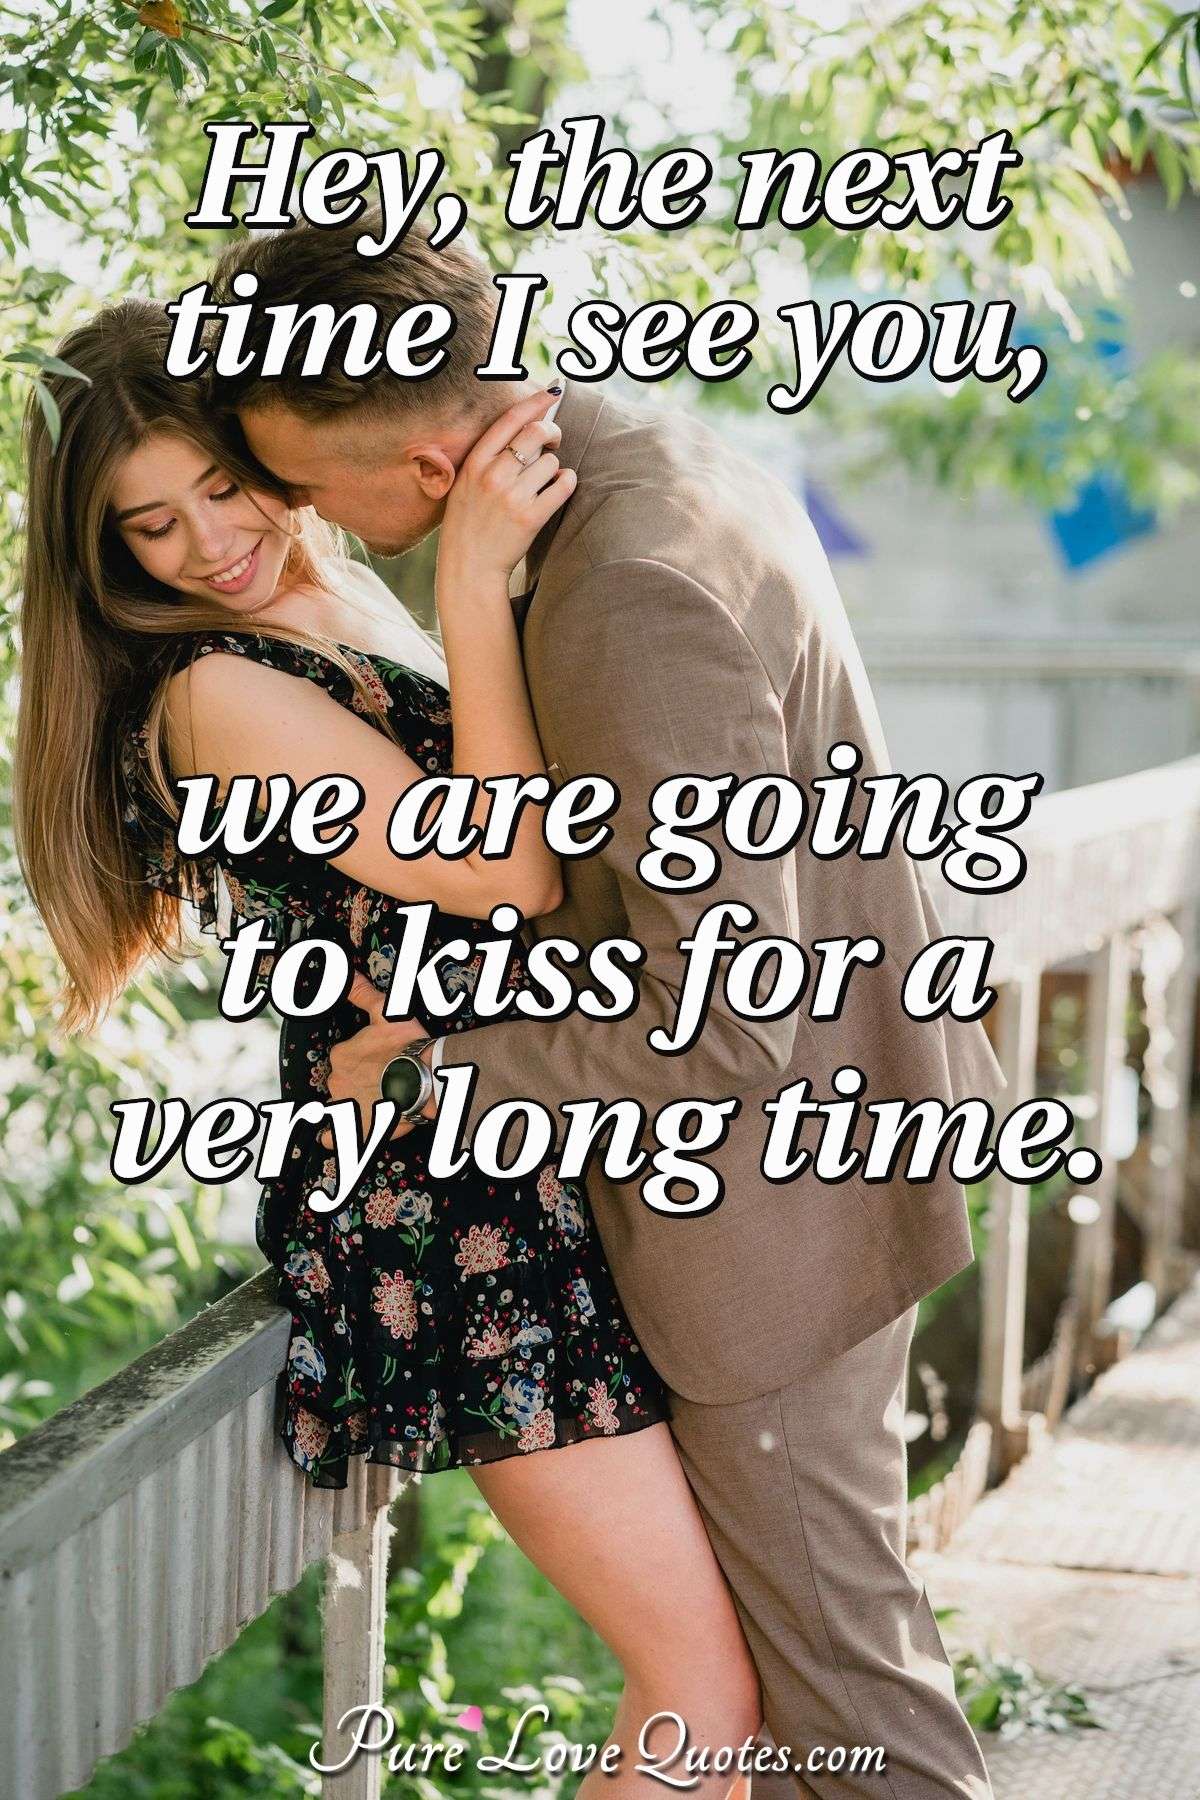 Hey, the next time I see you, we are going to kiss for a very long time. - Anonymous